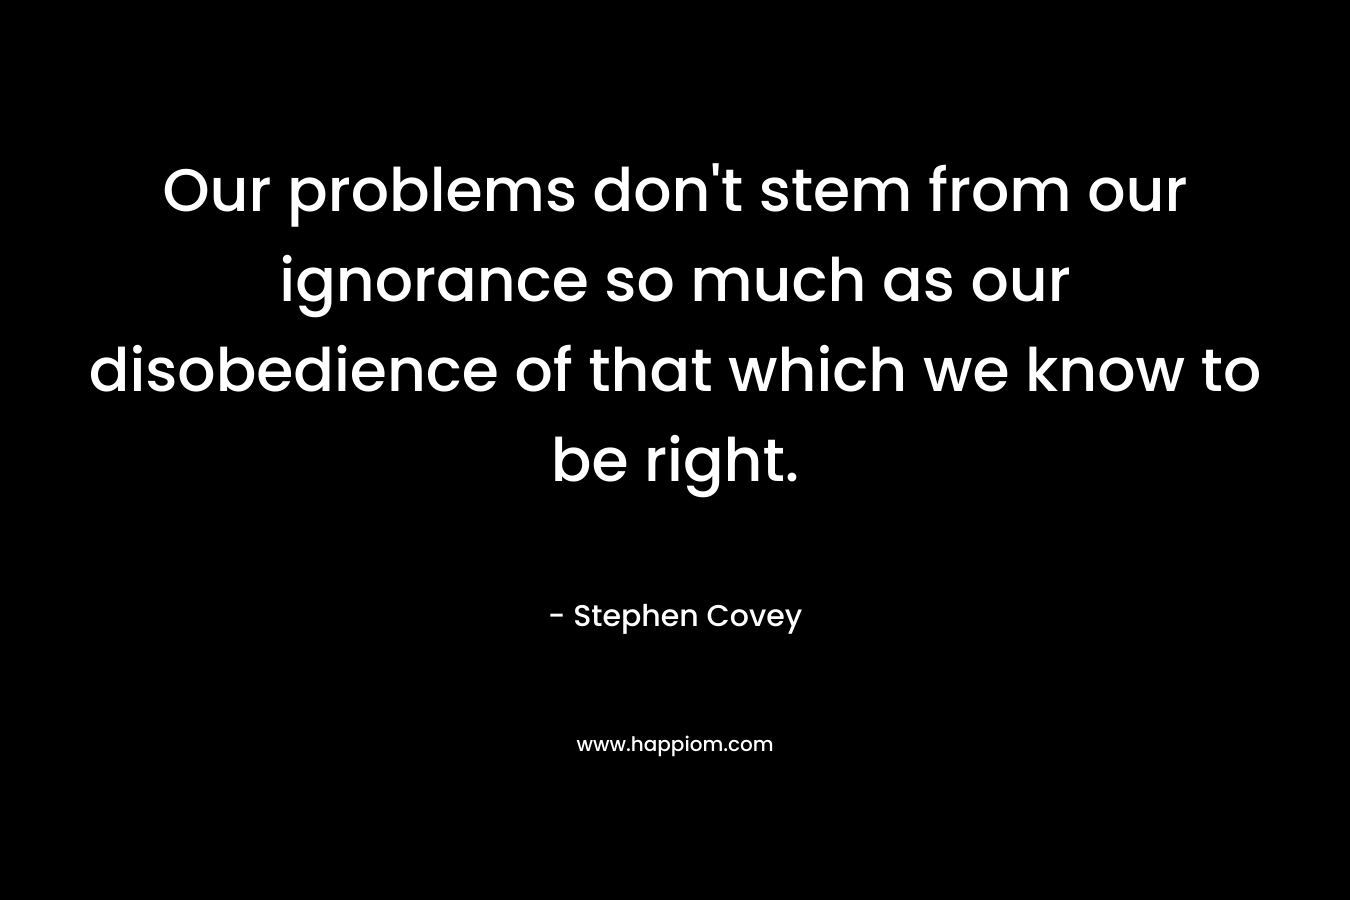 Our problems don’t stem from our ignorance so much as our disobedience of that which we know to be right. – Stephen Covey